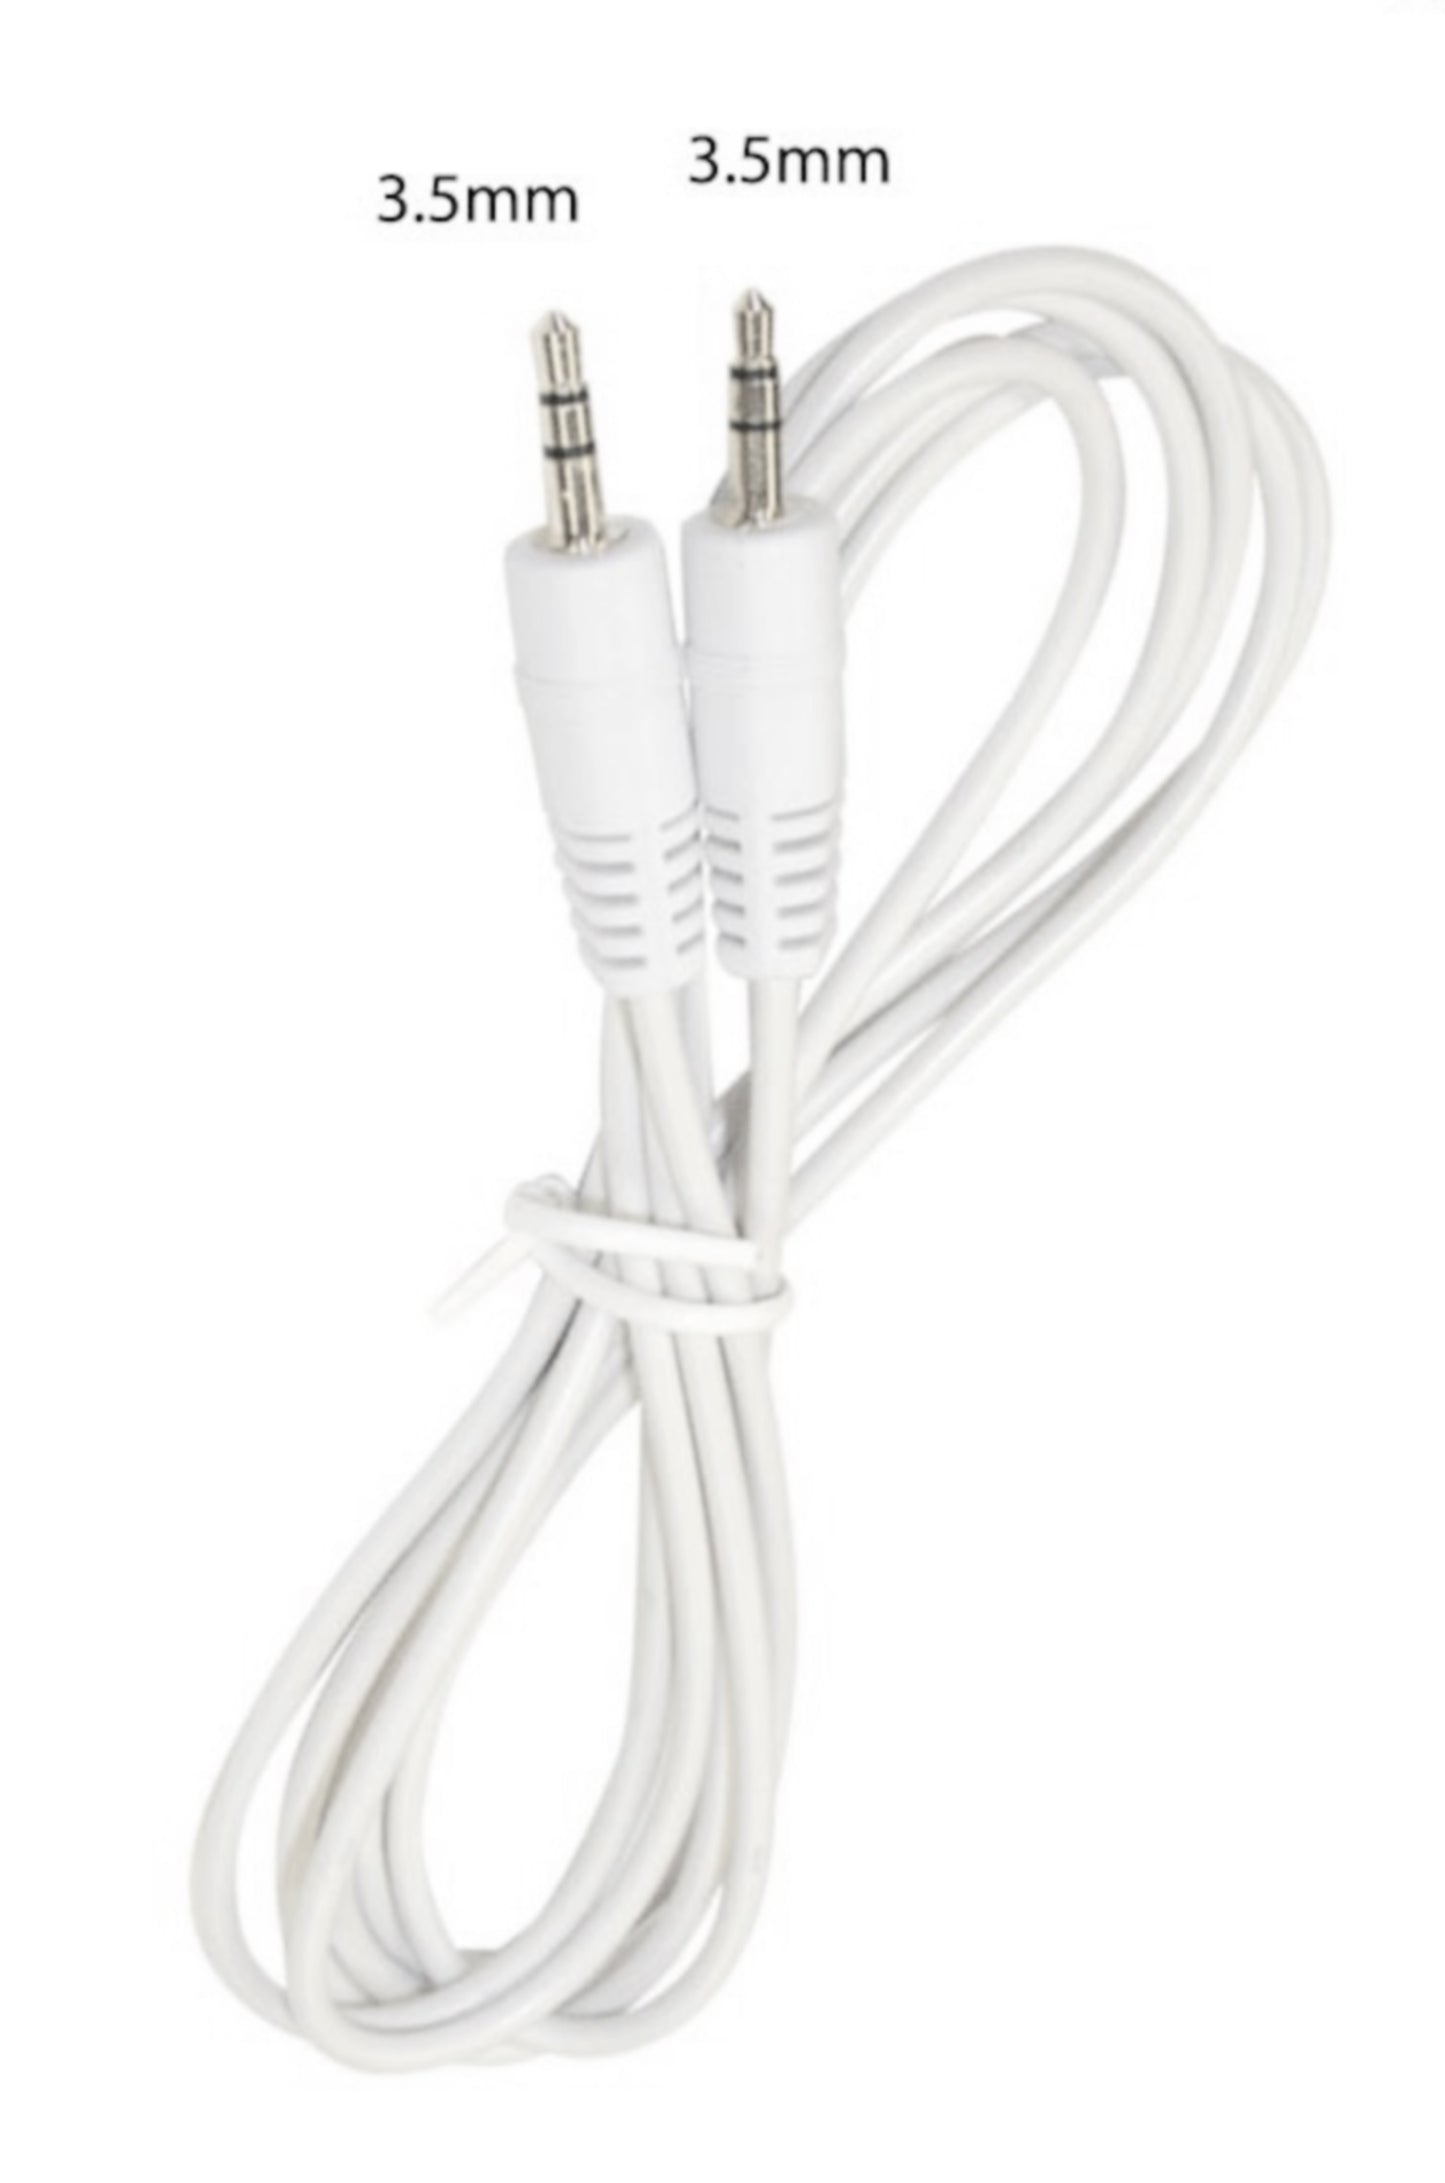 Stereo Audio Cable AUX Auxiliary Audio Plug 3.5MM Jack CAR, iPod iPhone IPAD New - Sonitek